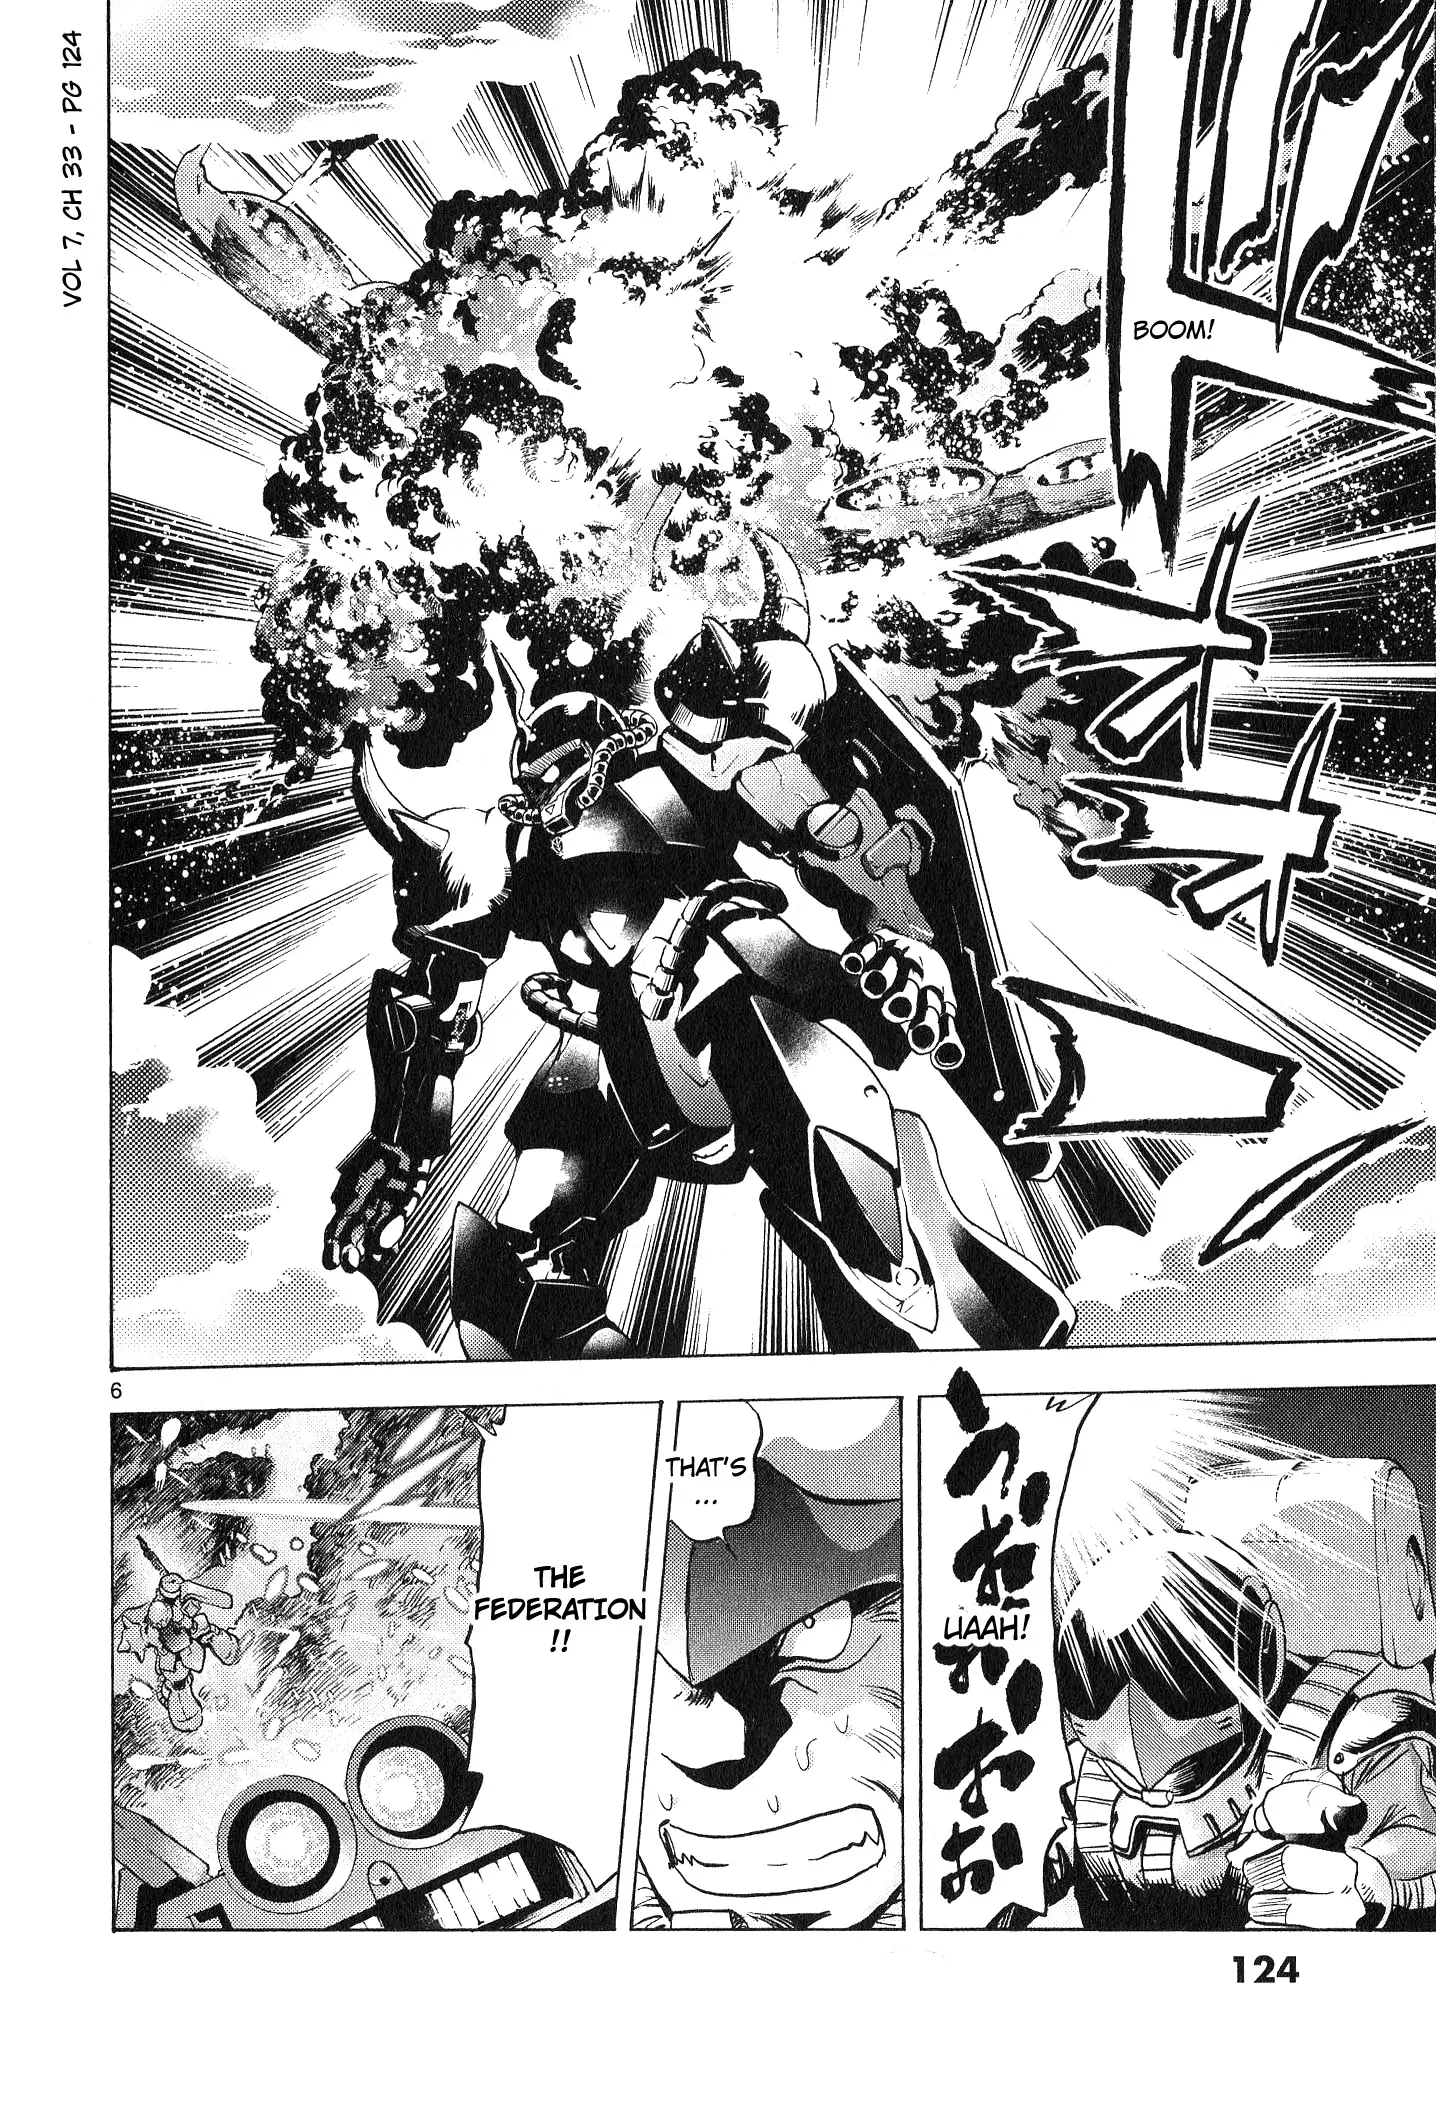 Mobile Suit Gundam Aggressor - 33 page 5-0aa7bfdb